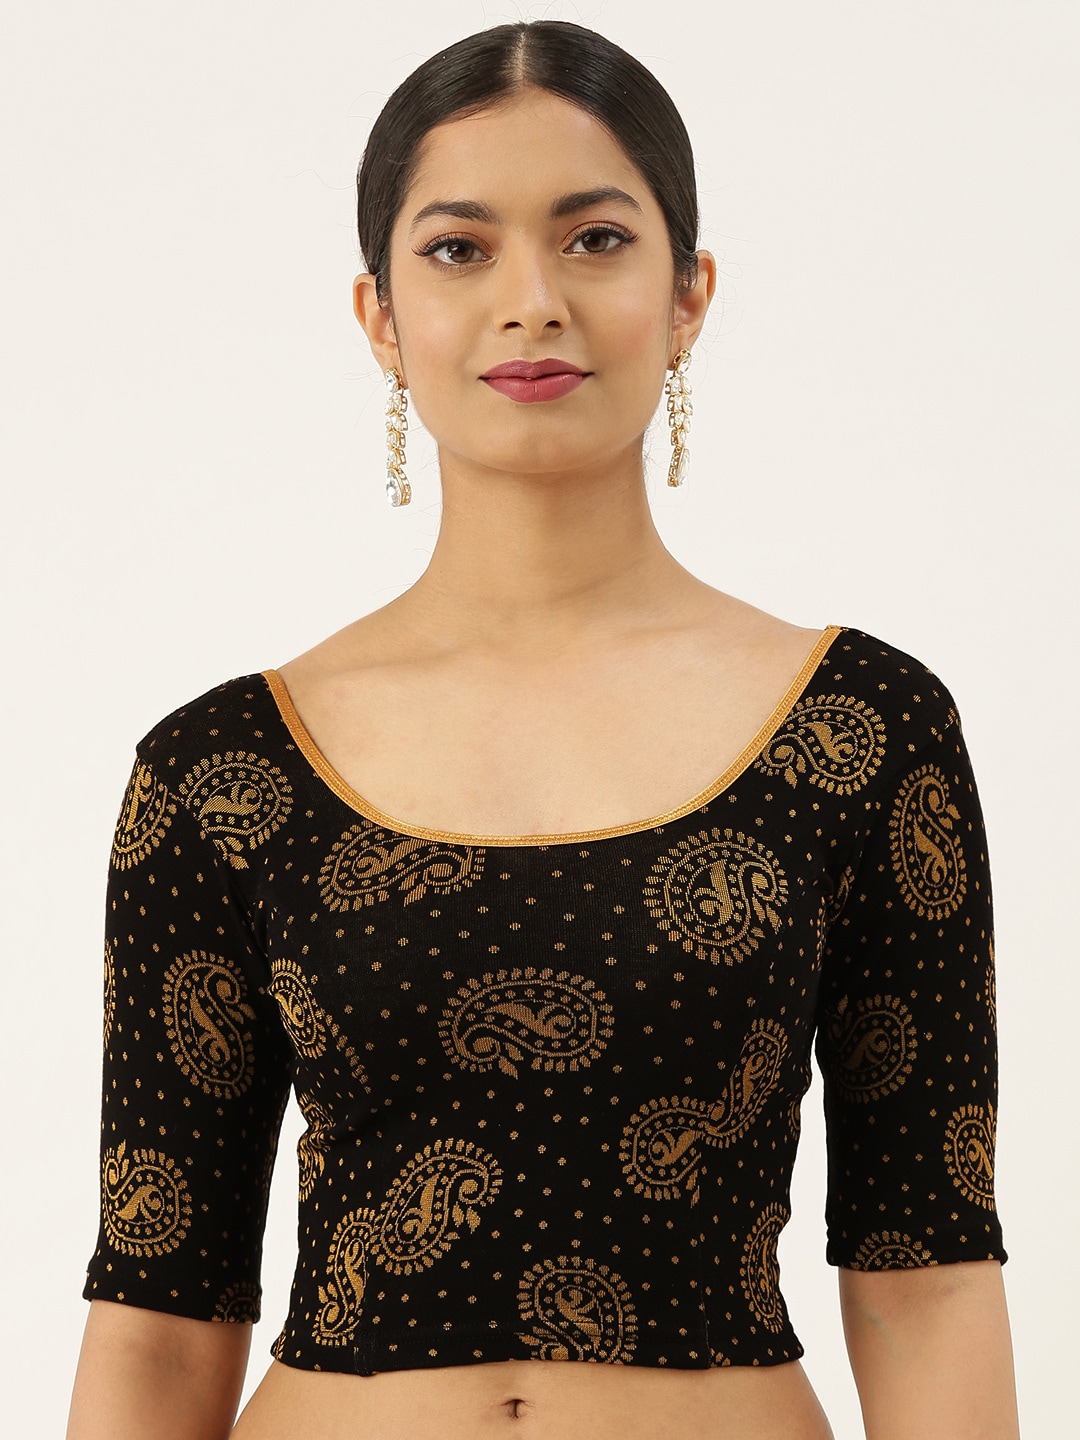 VASTRANAND Women's Black and Orange Printed Stretchable Blouse Price in India